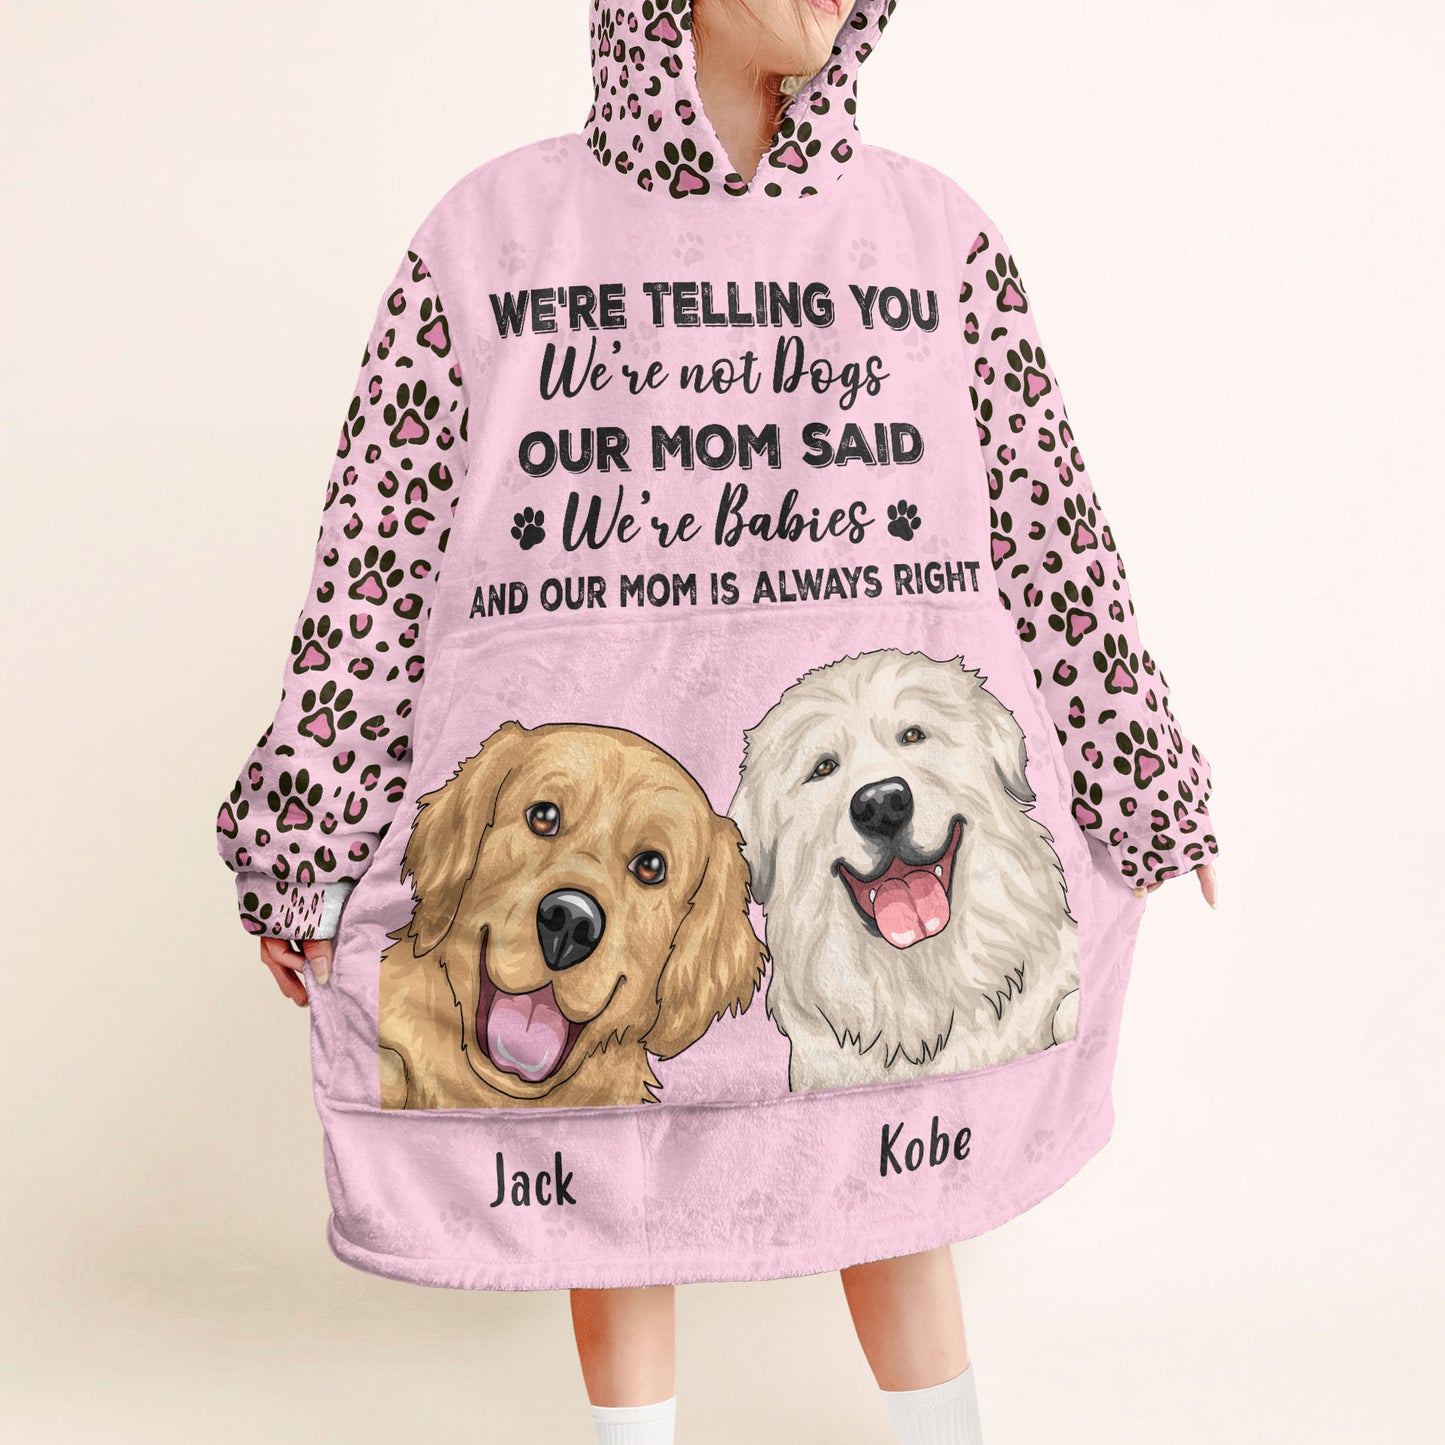 My Mom Said I'm A Baby - Personalized Oversized Blanket Hoodie - Mother's Day Birthday Gift For Mom, Wife, Dog Lovers, Cat Lovers